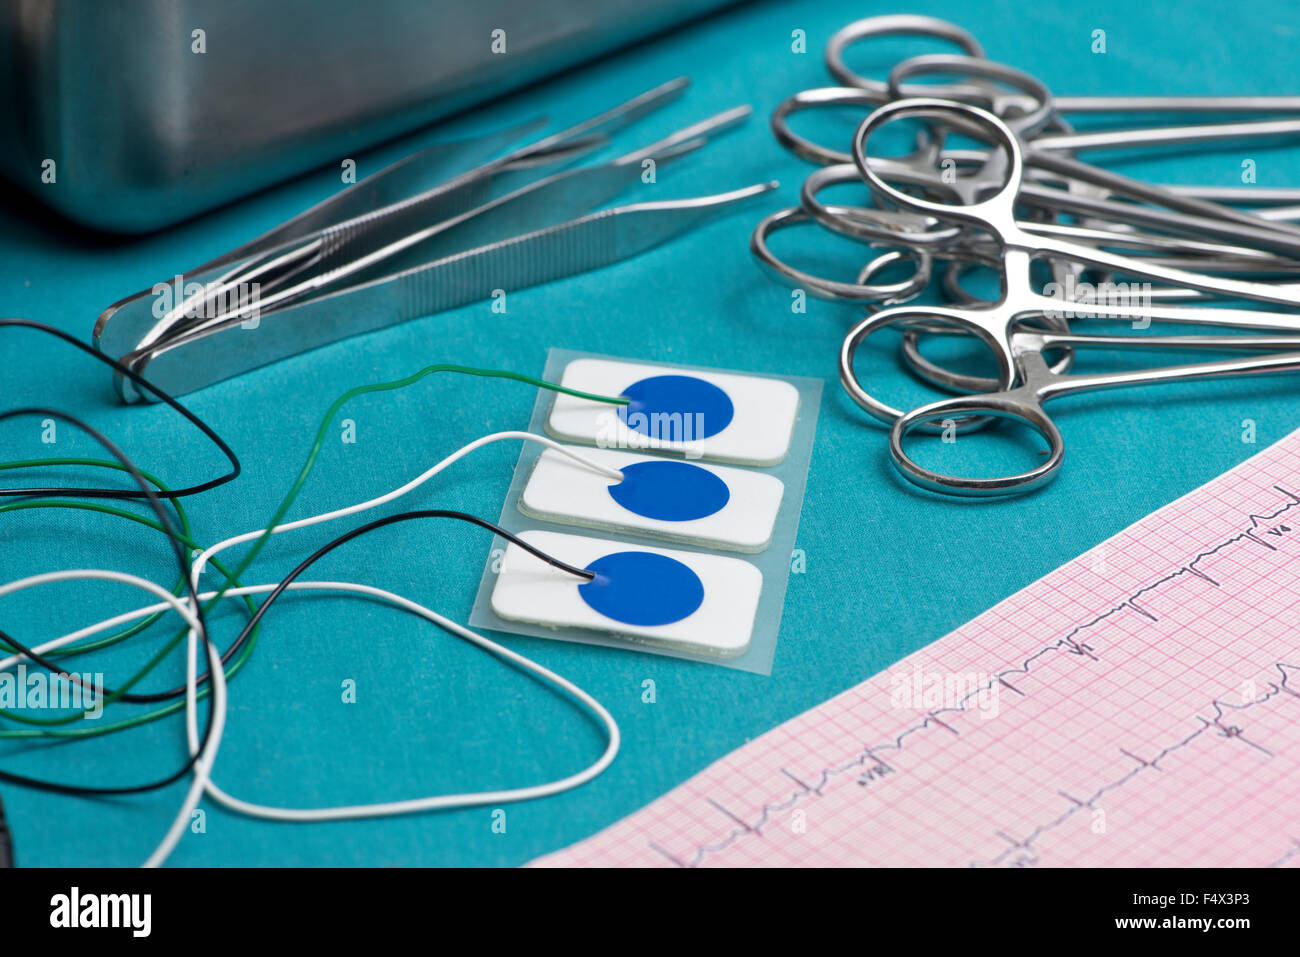 Electrocardiogram leads and electrocardiograph on surgical table. Stock Photo